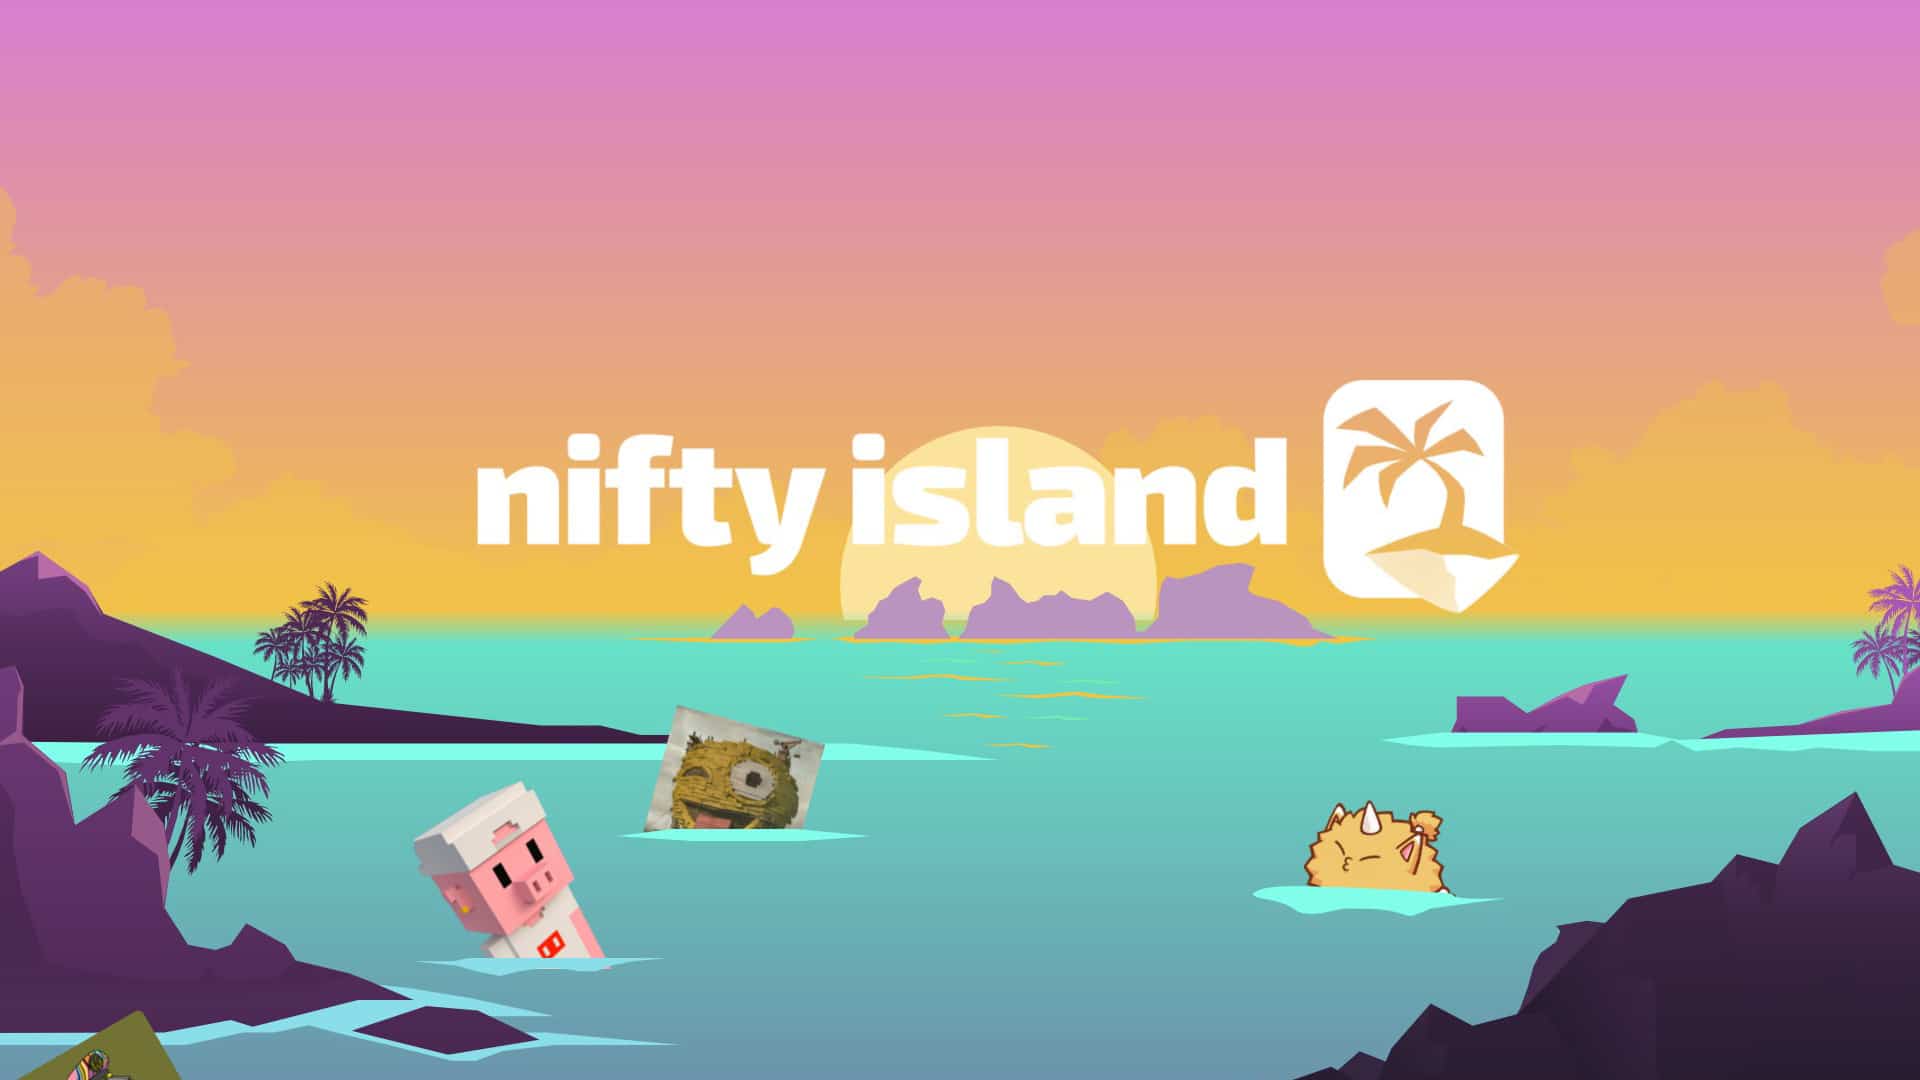 Nifty Island: Bring Your Assets To The Gameverse - EGamers.io - P2E NFT  Games Portal